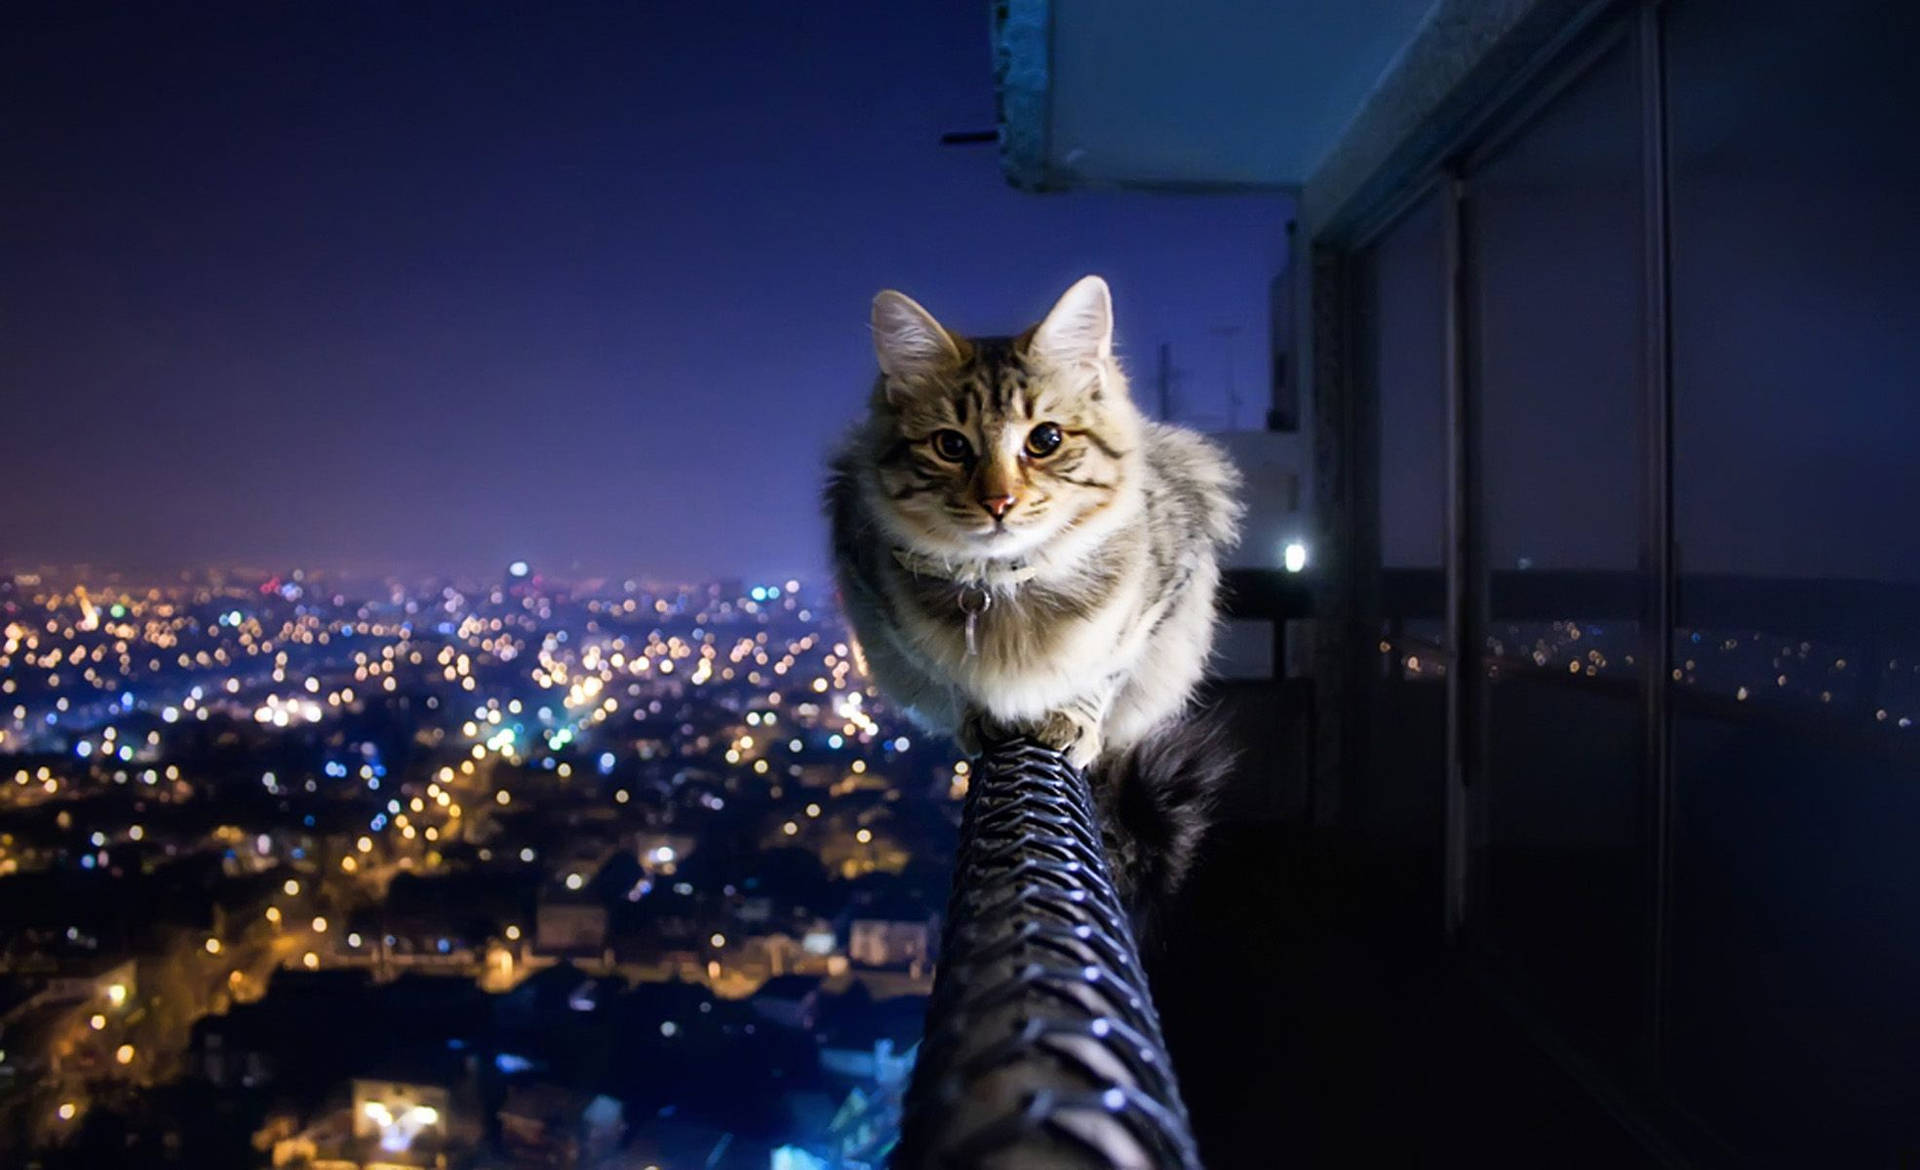 Download Hd Cat And City View Wallpaper 